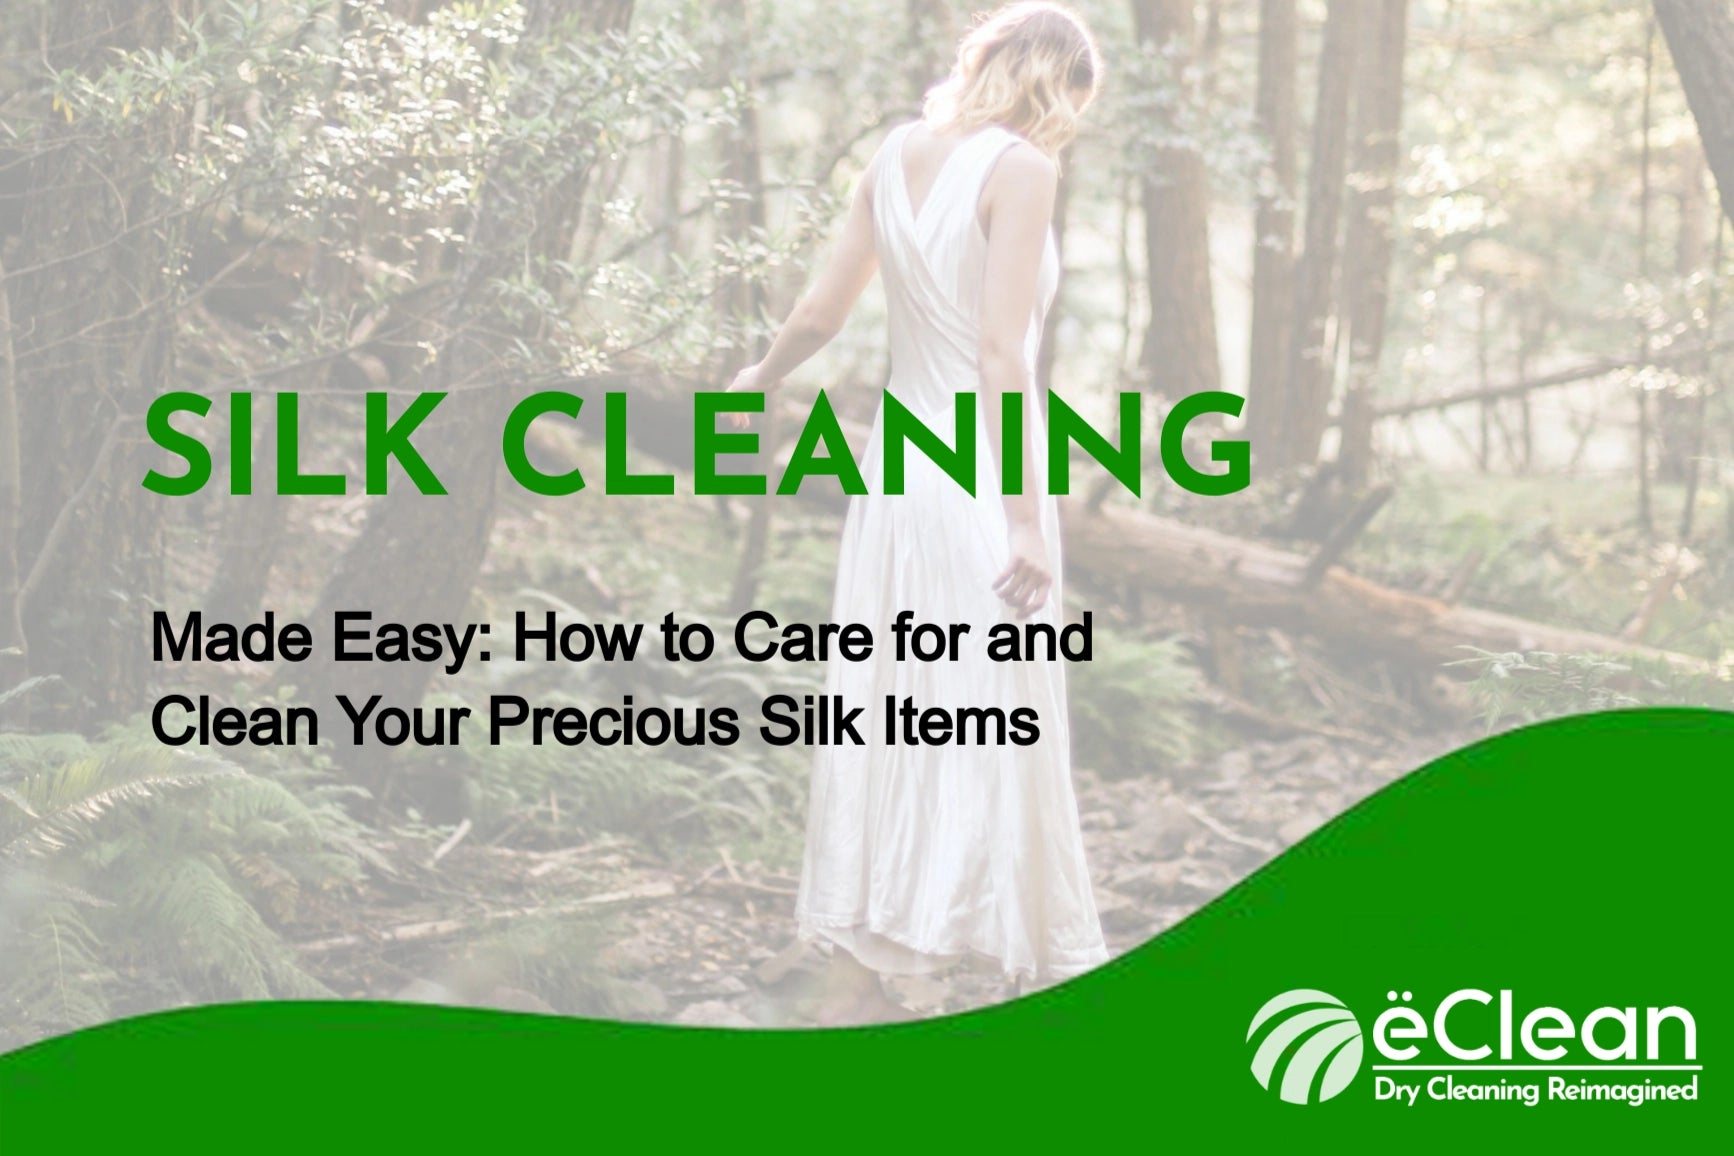 Silk Cleaning Made Easy: How to Care for and Clean Your Precious Silk Items